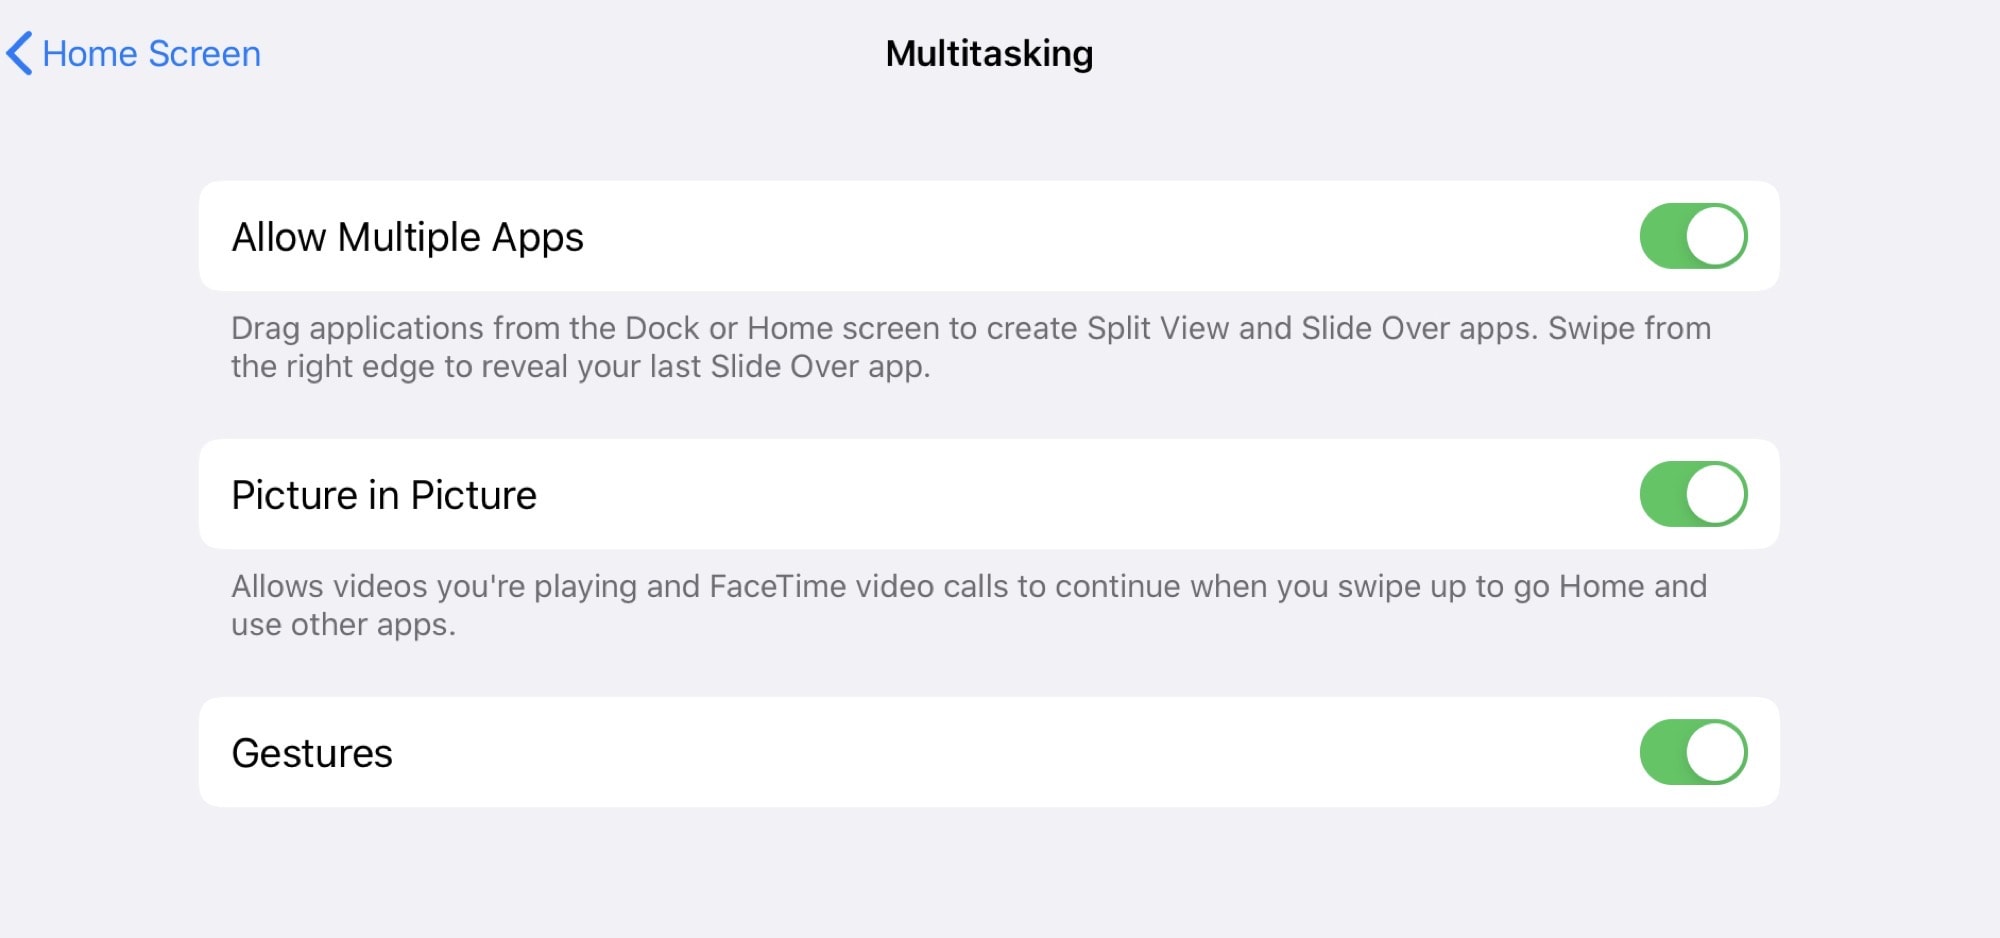 Want to disable iPad multitasking? Start here in the settings.